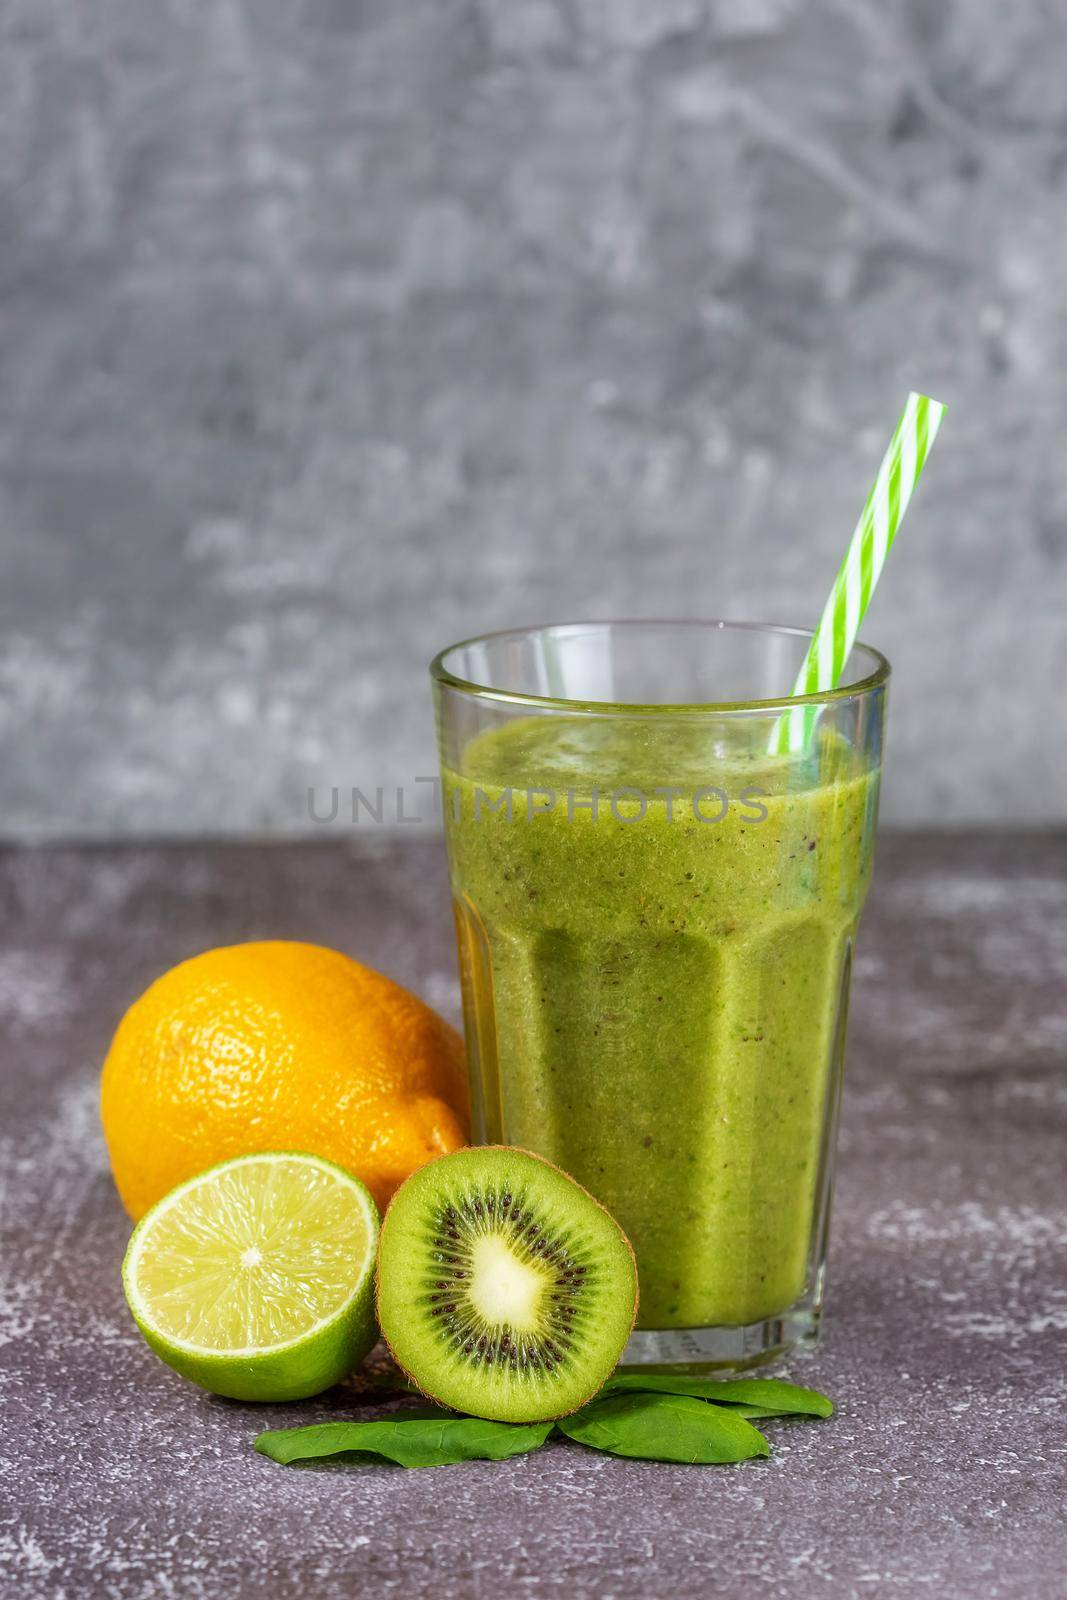 Fresh healthy smoothie drink in a tall glass glass with a straw surrounded by fruits on a gray concrete background. The concept of proper nutrition, weight loss, detoxification of the body.